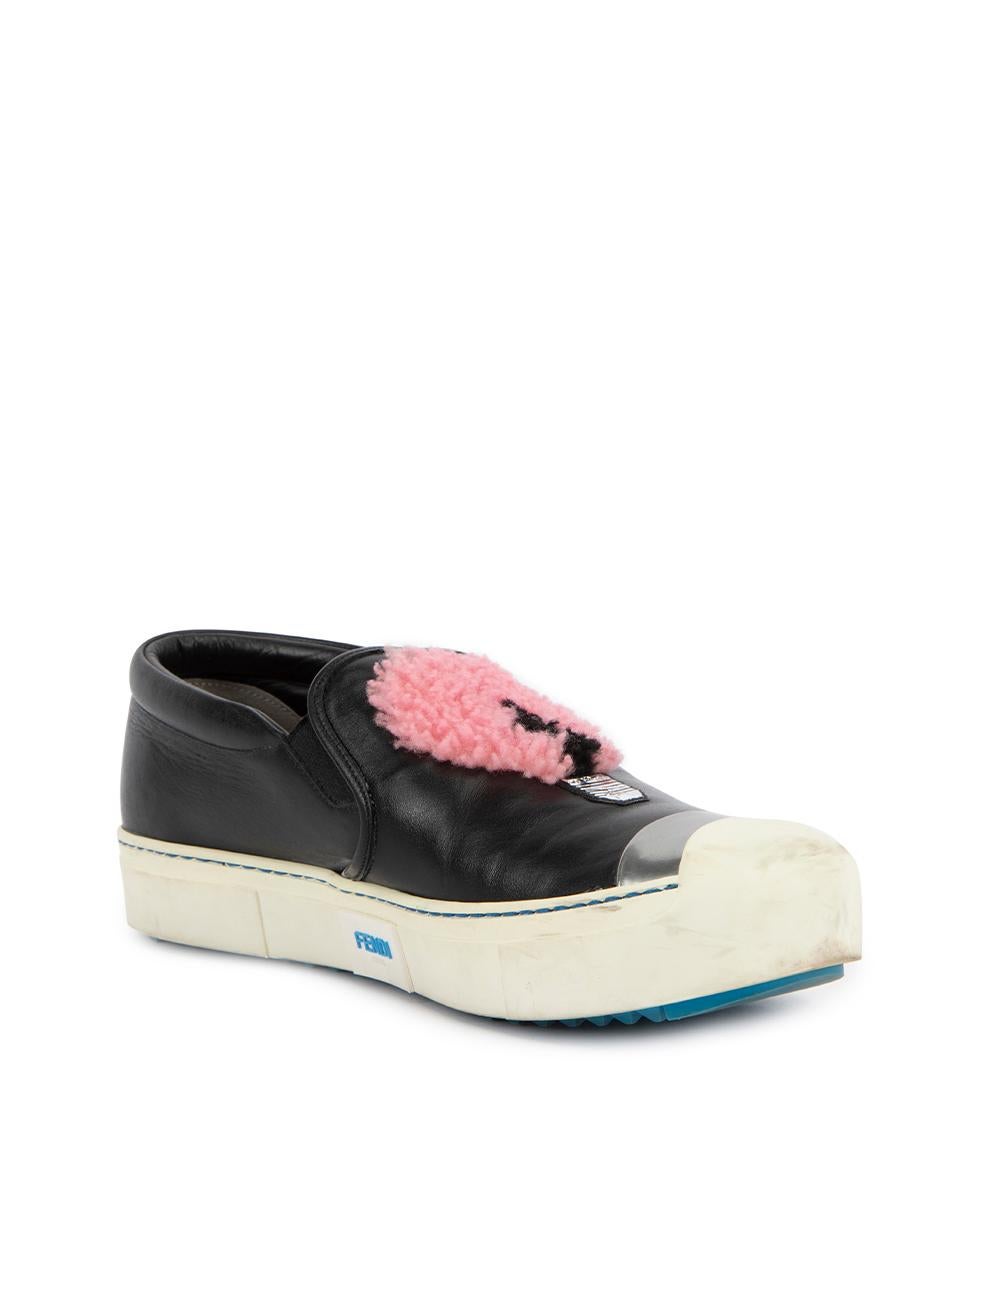 CONDITION is Very good. Minimal wear to slip ons is evident. Minimal wear to the toe point and midsole where scuffs/marks can be seen on this used Fendi designer resale item. Details Black Leather Pink wool light bulb icon Yellow wool apple icon